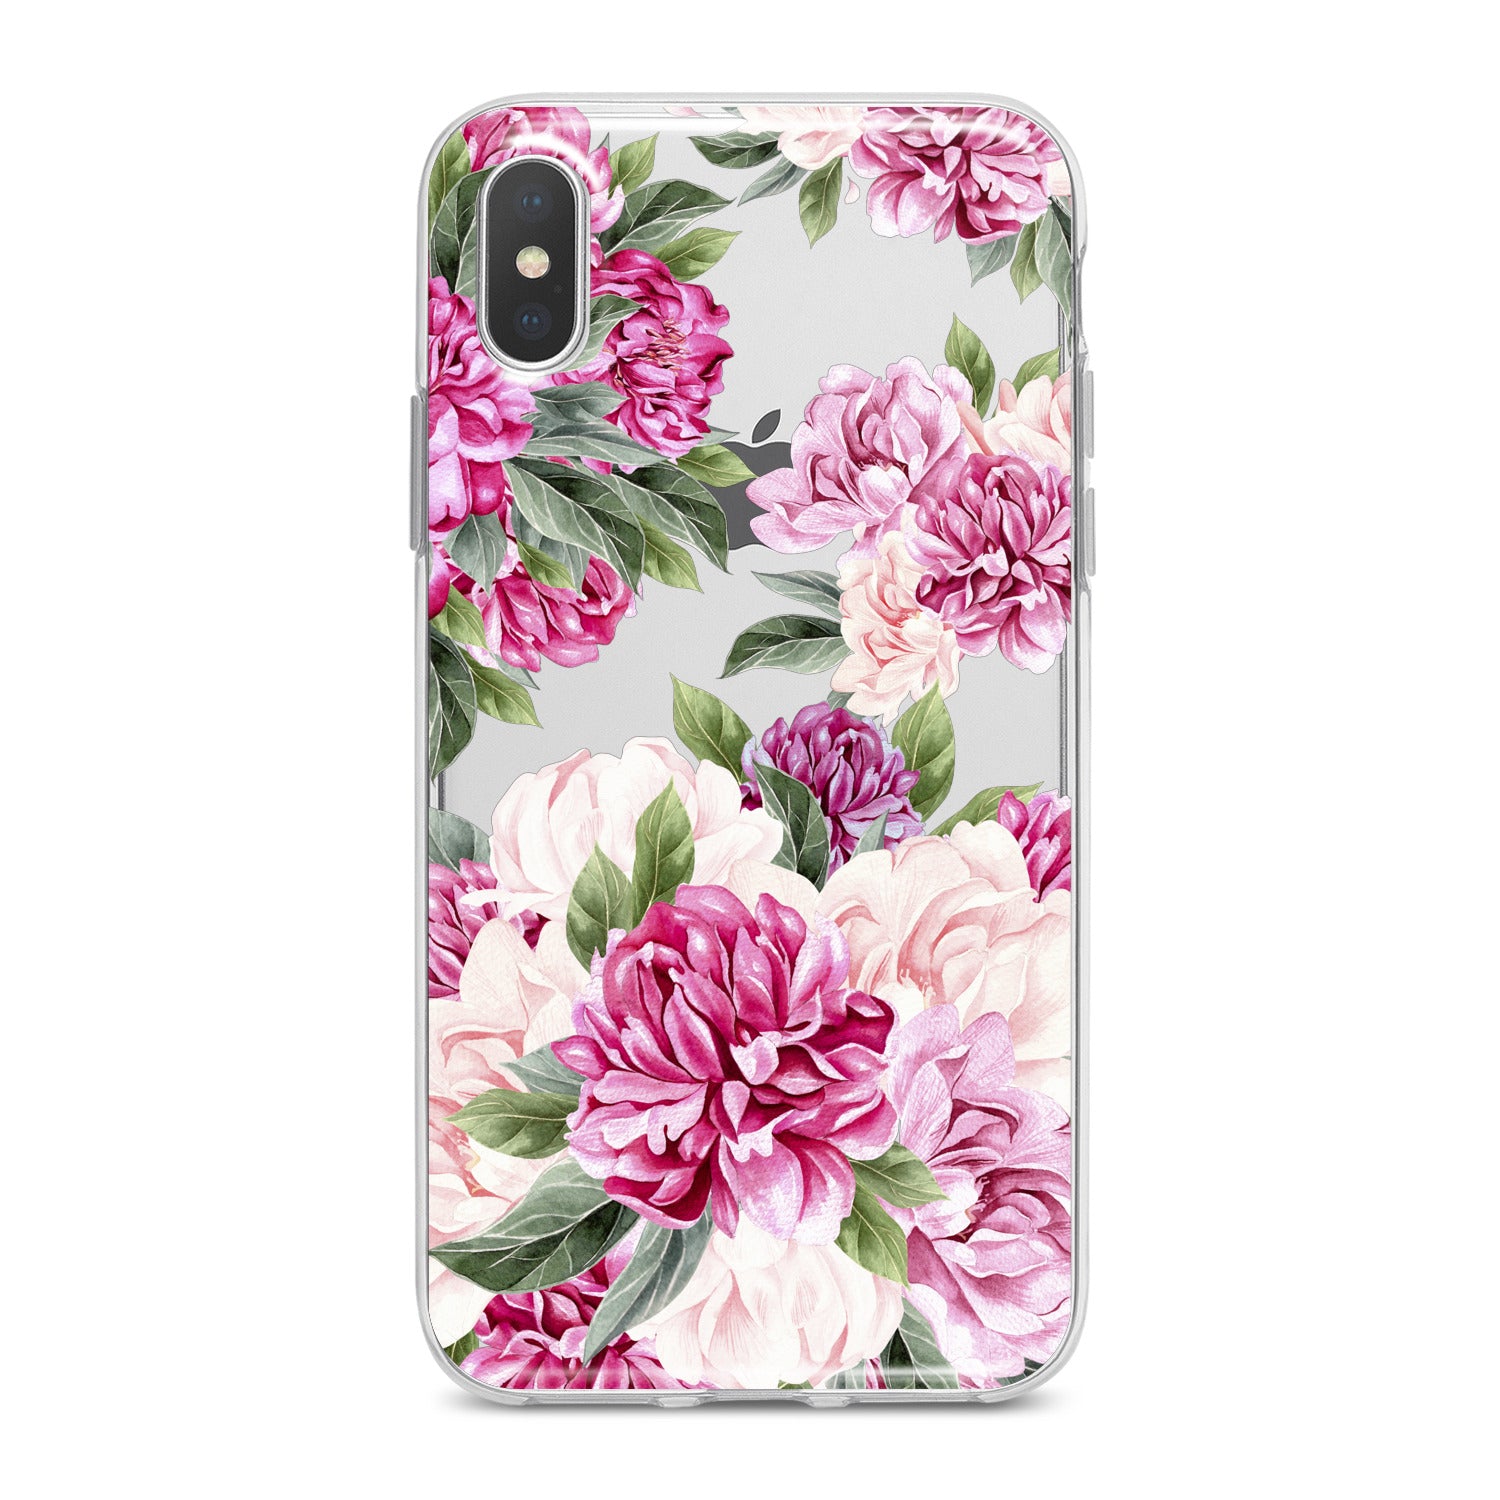 Lex Altern Awesome Peonies Pattern Phone Case for your iPhone & Android phone.